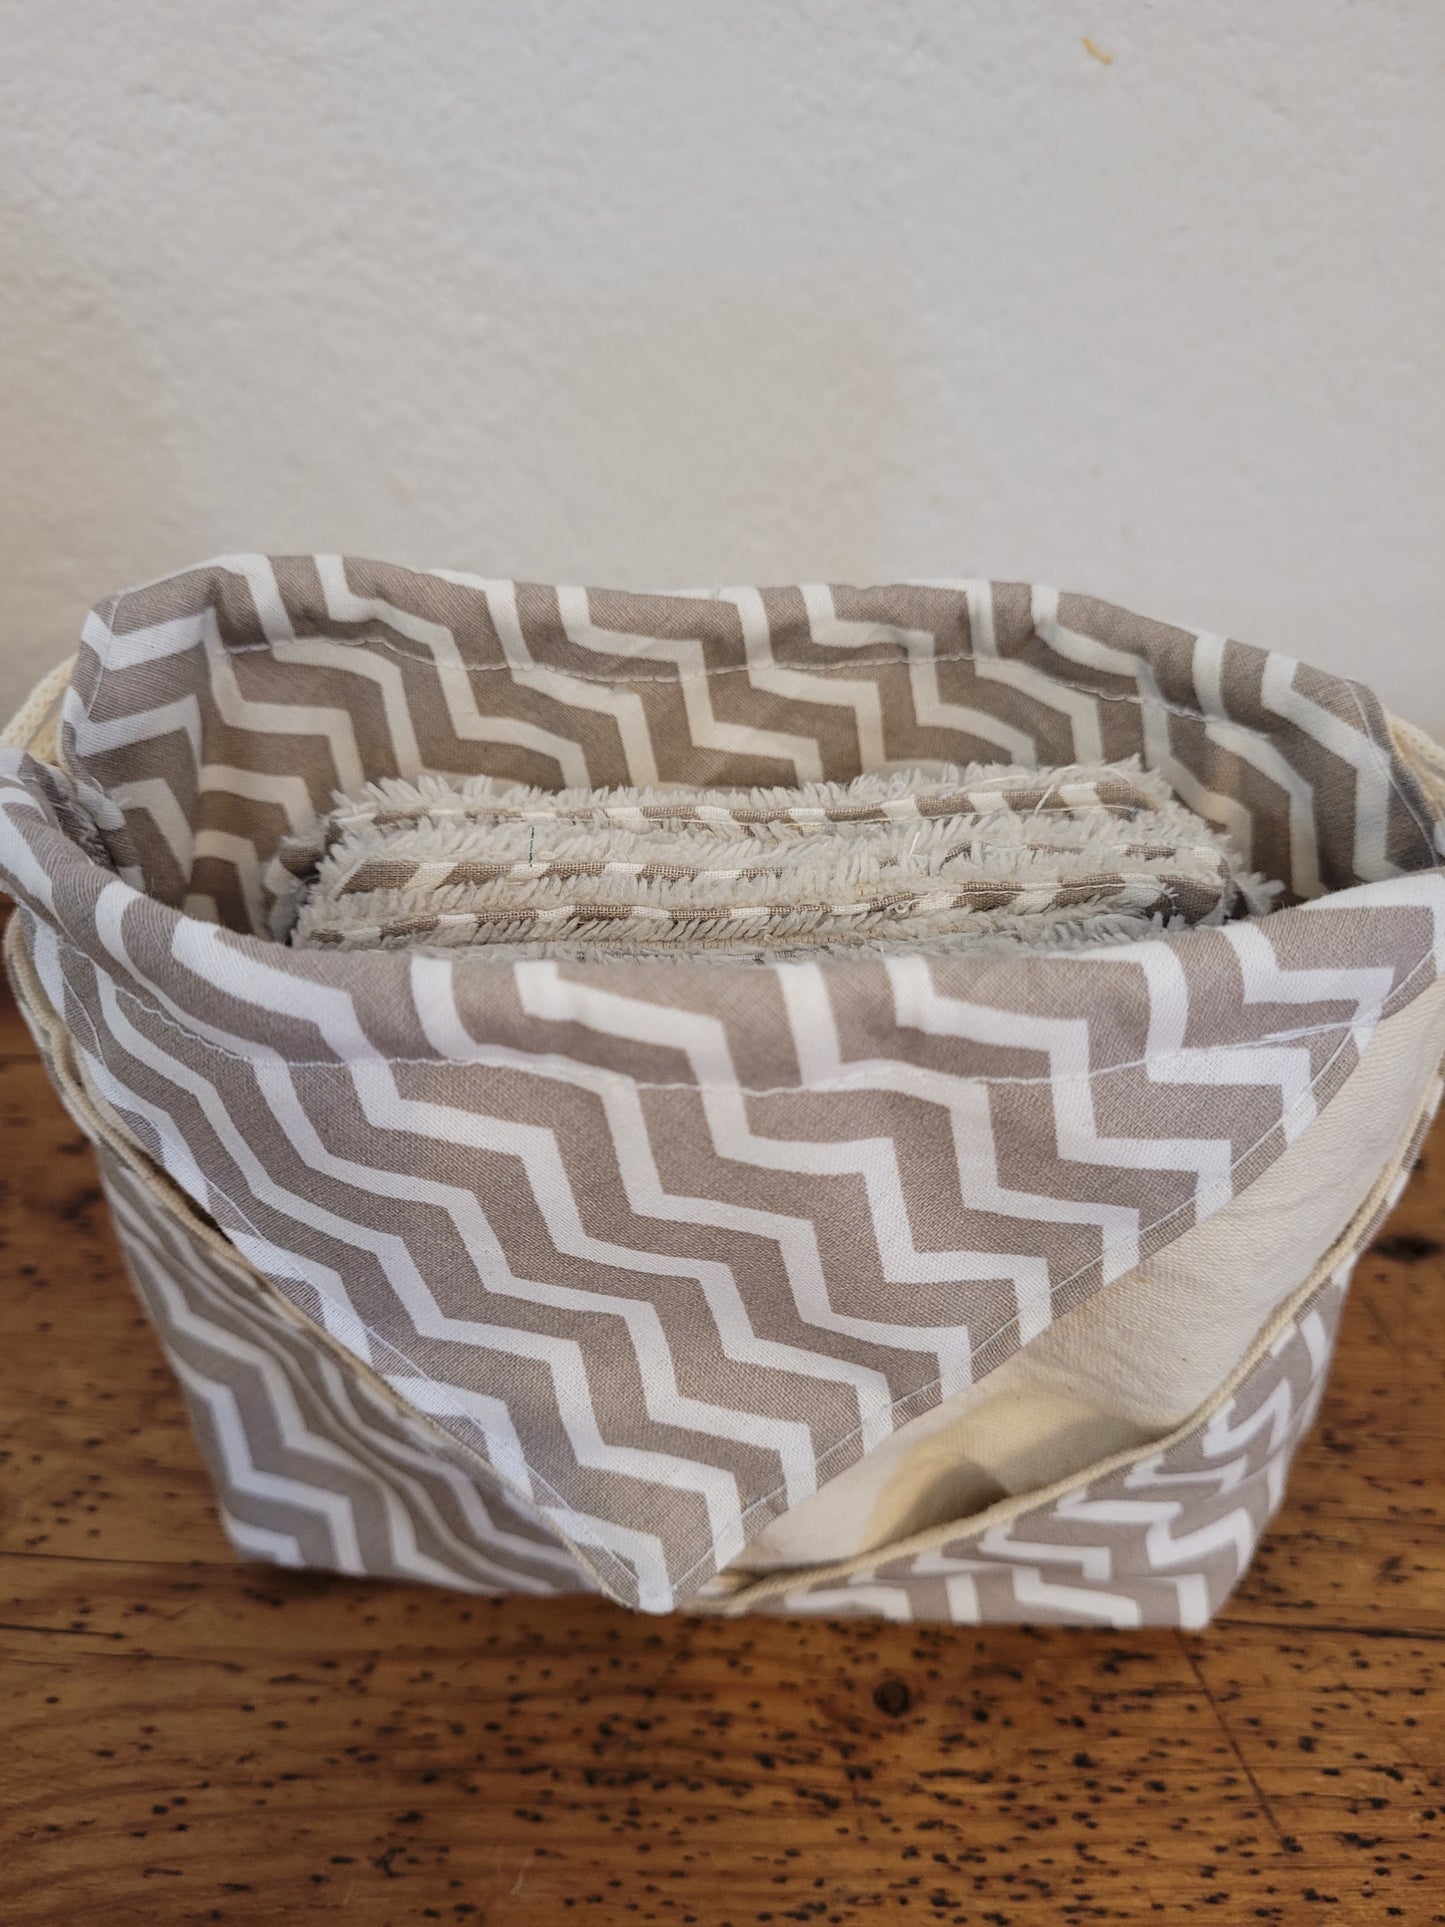 The striped pouch and its 10 washable cottons